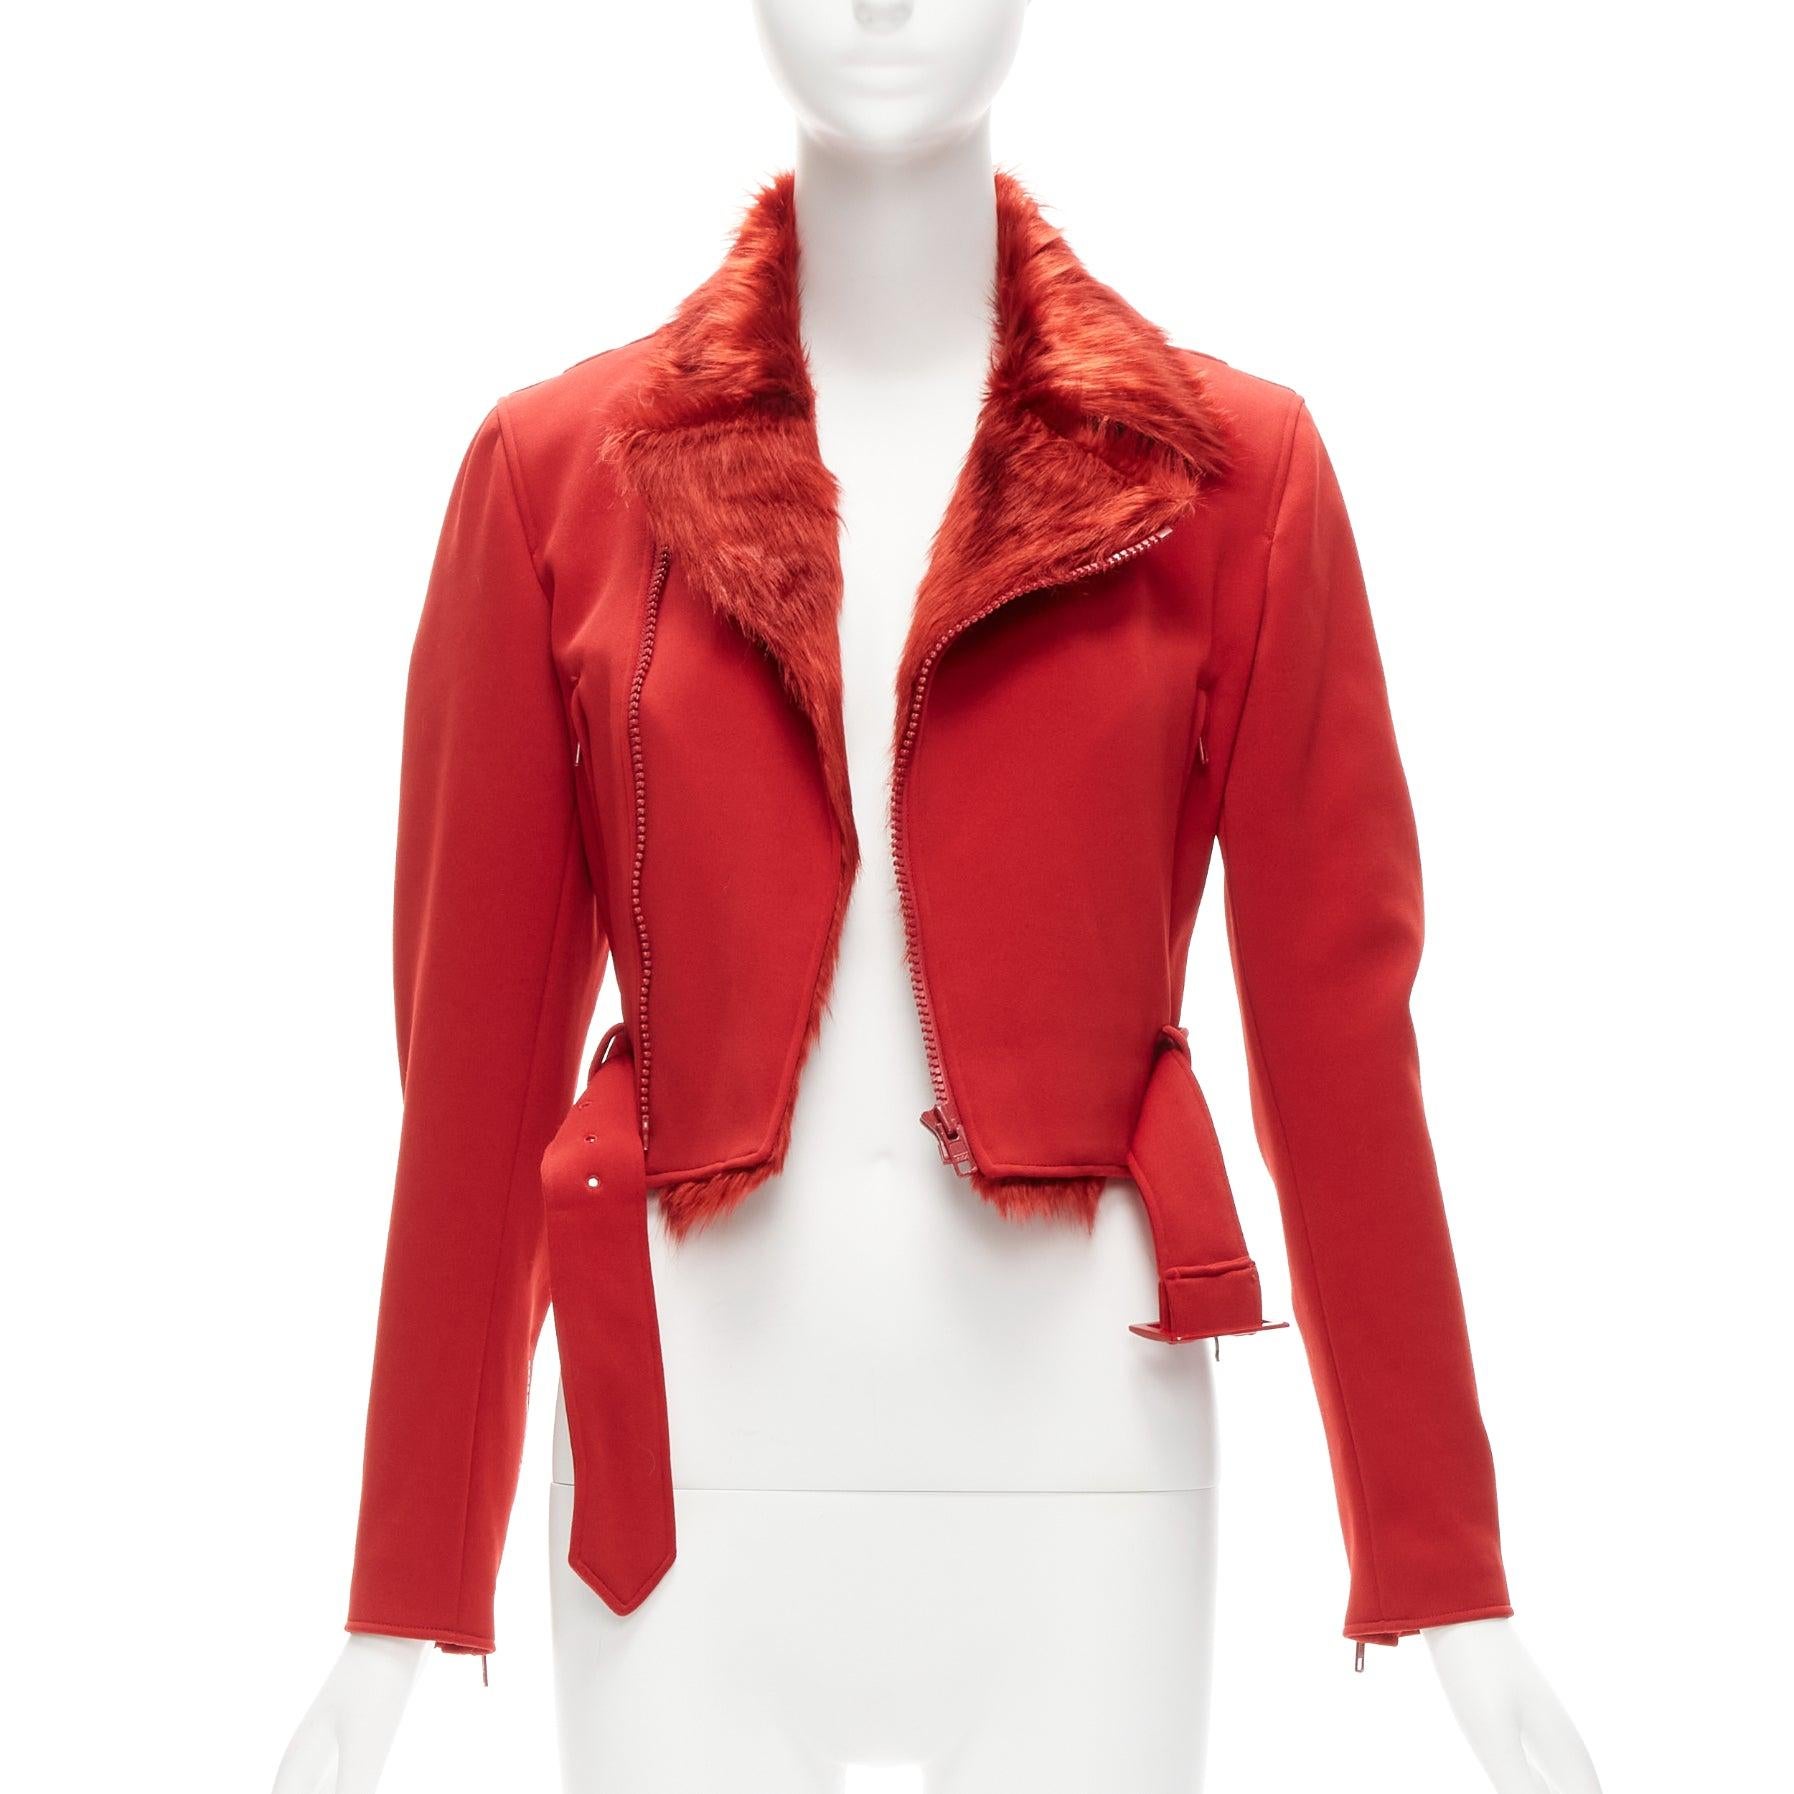 YOHJI YAMAMOTO red faux fur collar 3 stripes belted cropped biker jacket S
Reference: ANWU/A01082
Brand: Y3
Material: Fabric, Faux Fur
Color: Red
Pattern: Solid
Closure: Zip
Lining: Red Fabric
Extra Details: 3 Stripes signature at back center.
Made